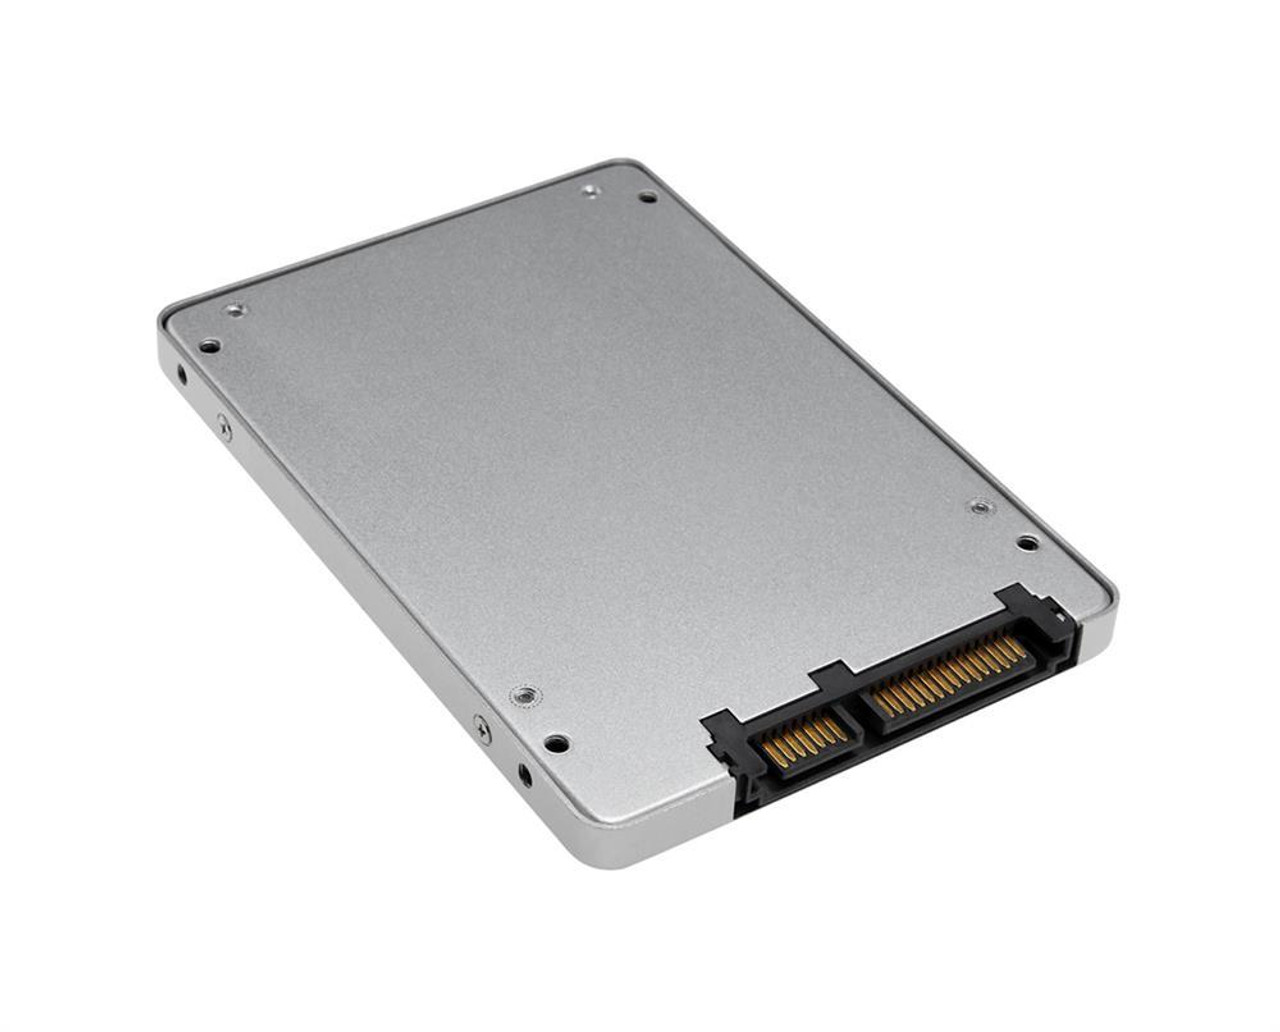 03B01000303DP ASUS 64GB MLC SATA 6Gbps 2.5-inch Internal Solid State Drive (SSD) for All-in-one E Series